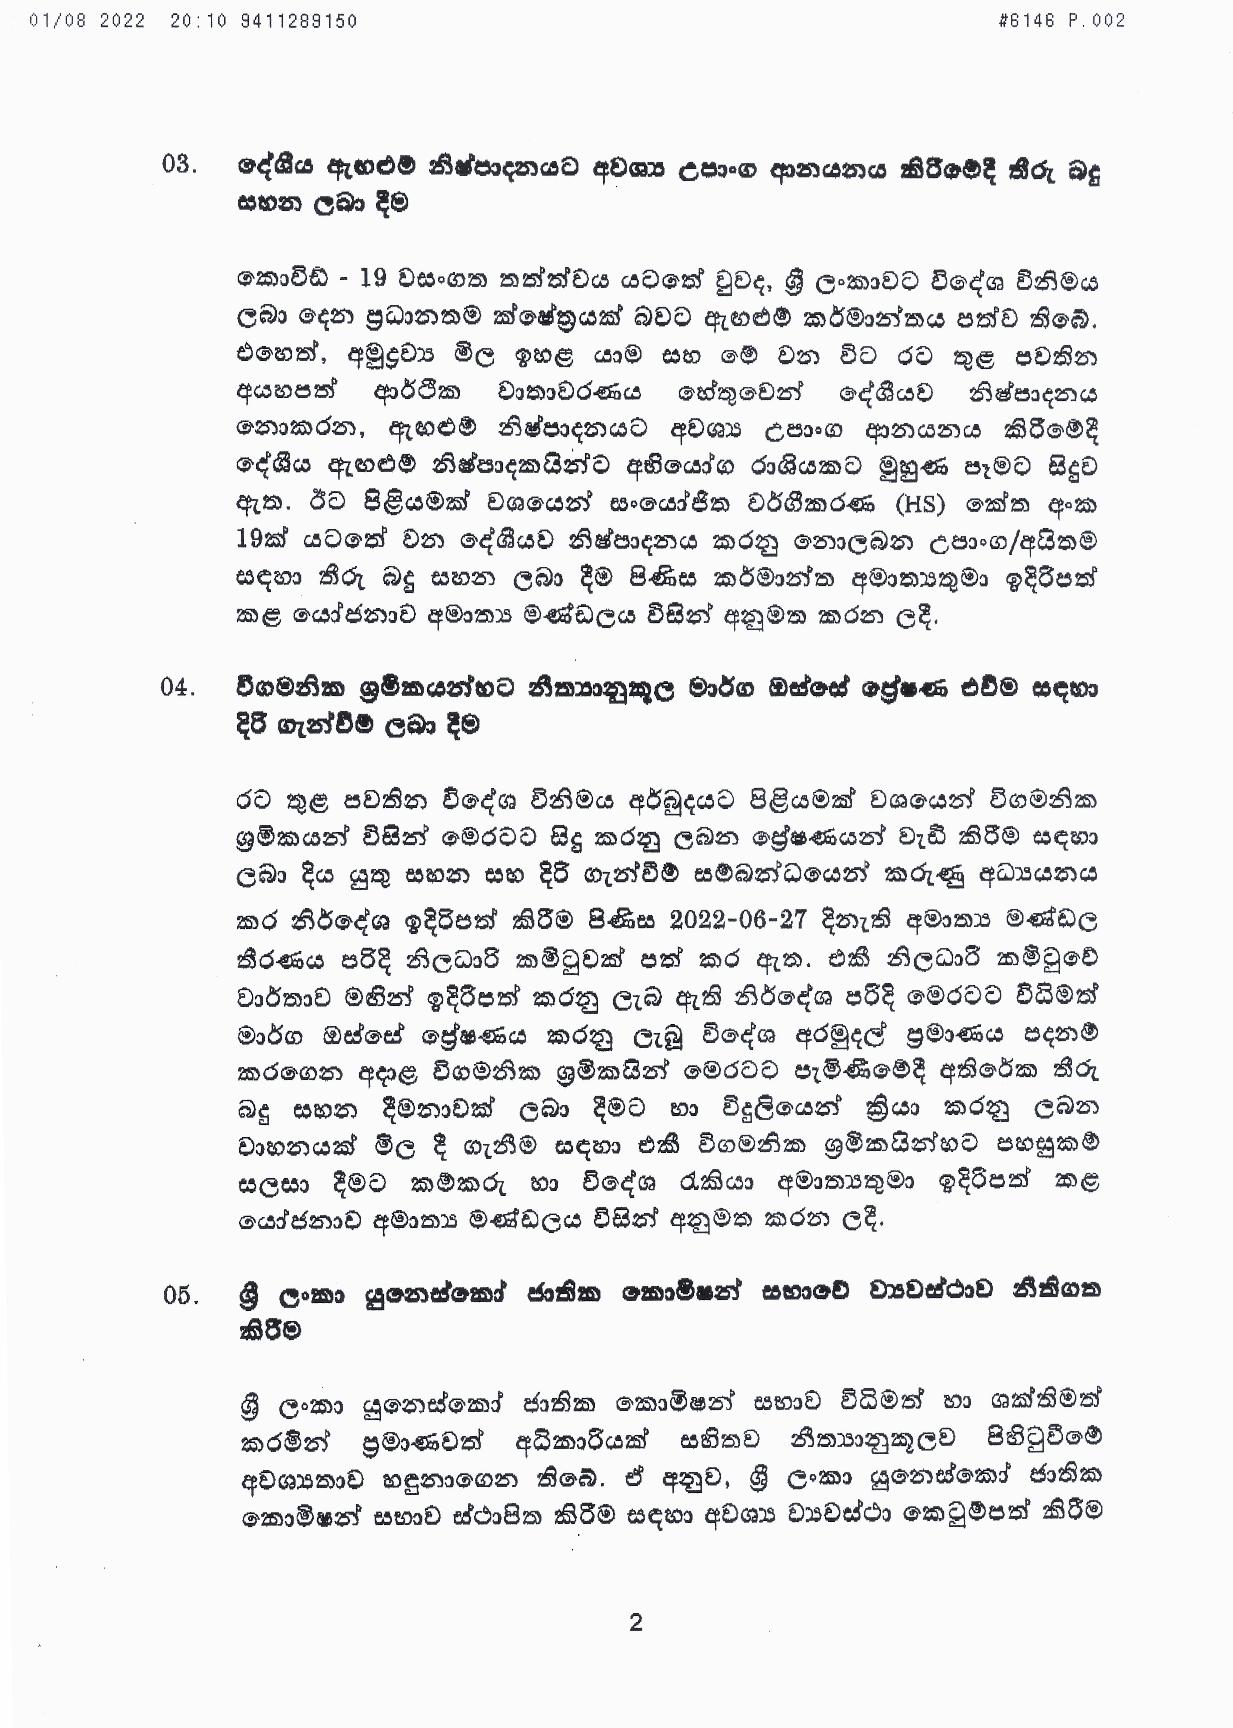 Cabinet Decisions on 01.08.2022 page 002